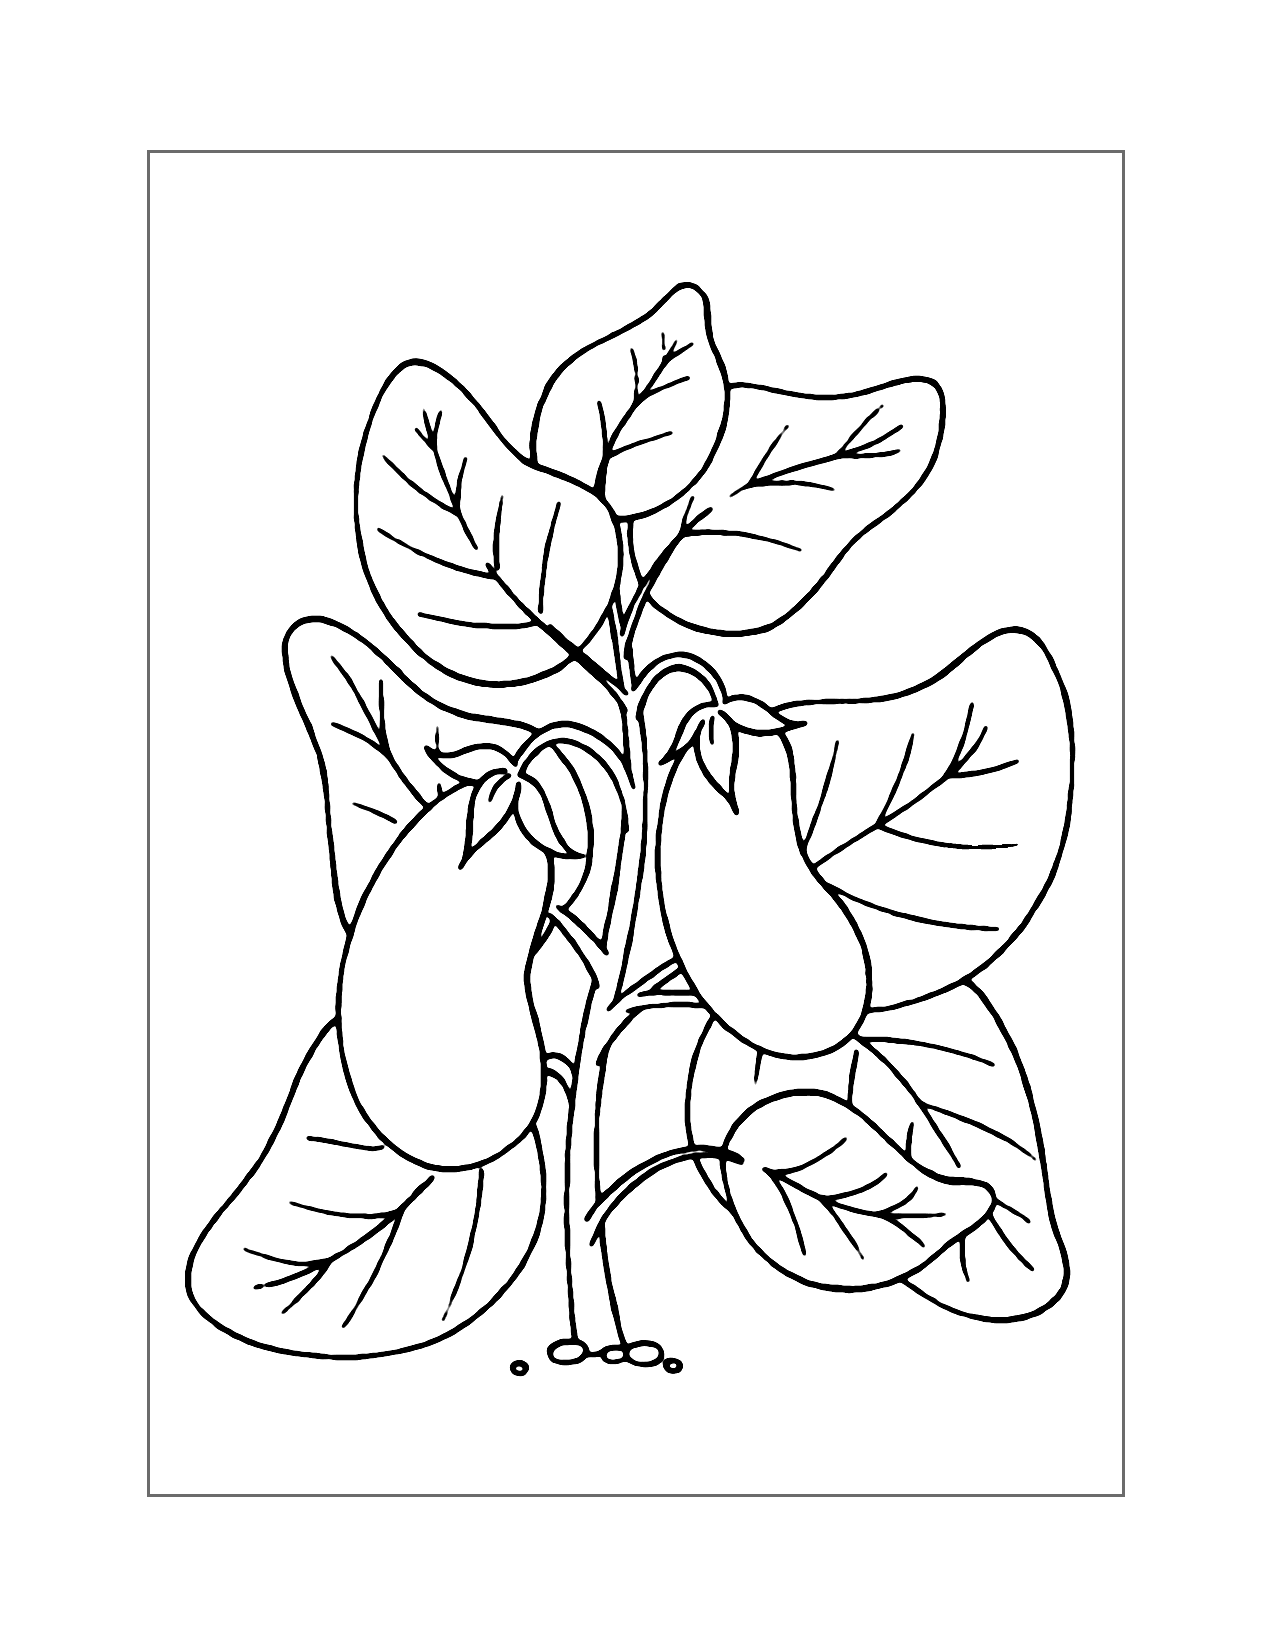 Eggplant Plant Coloring Page